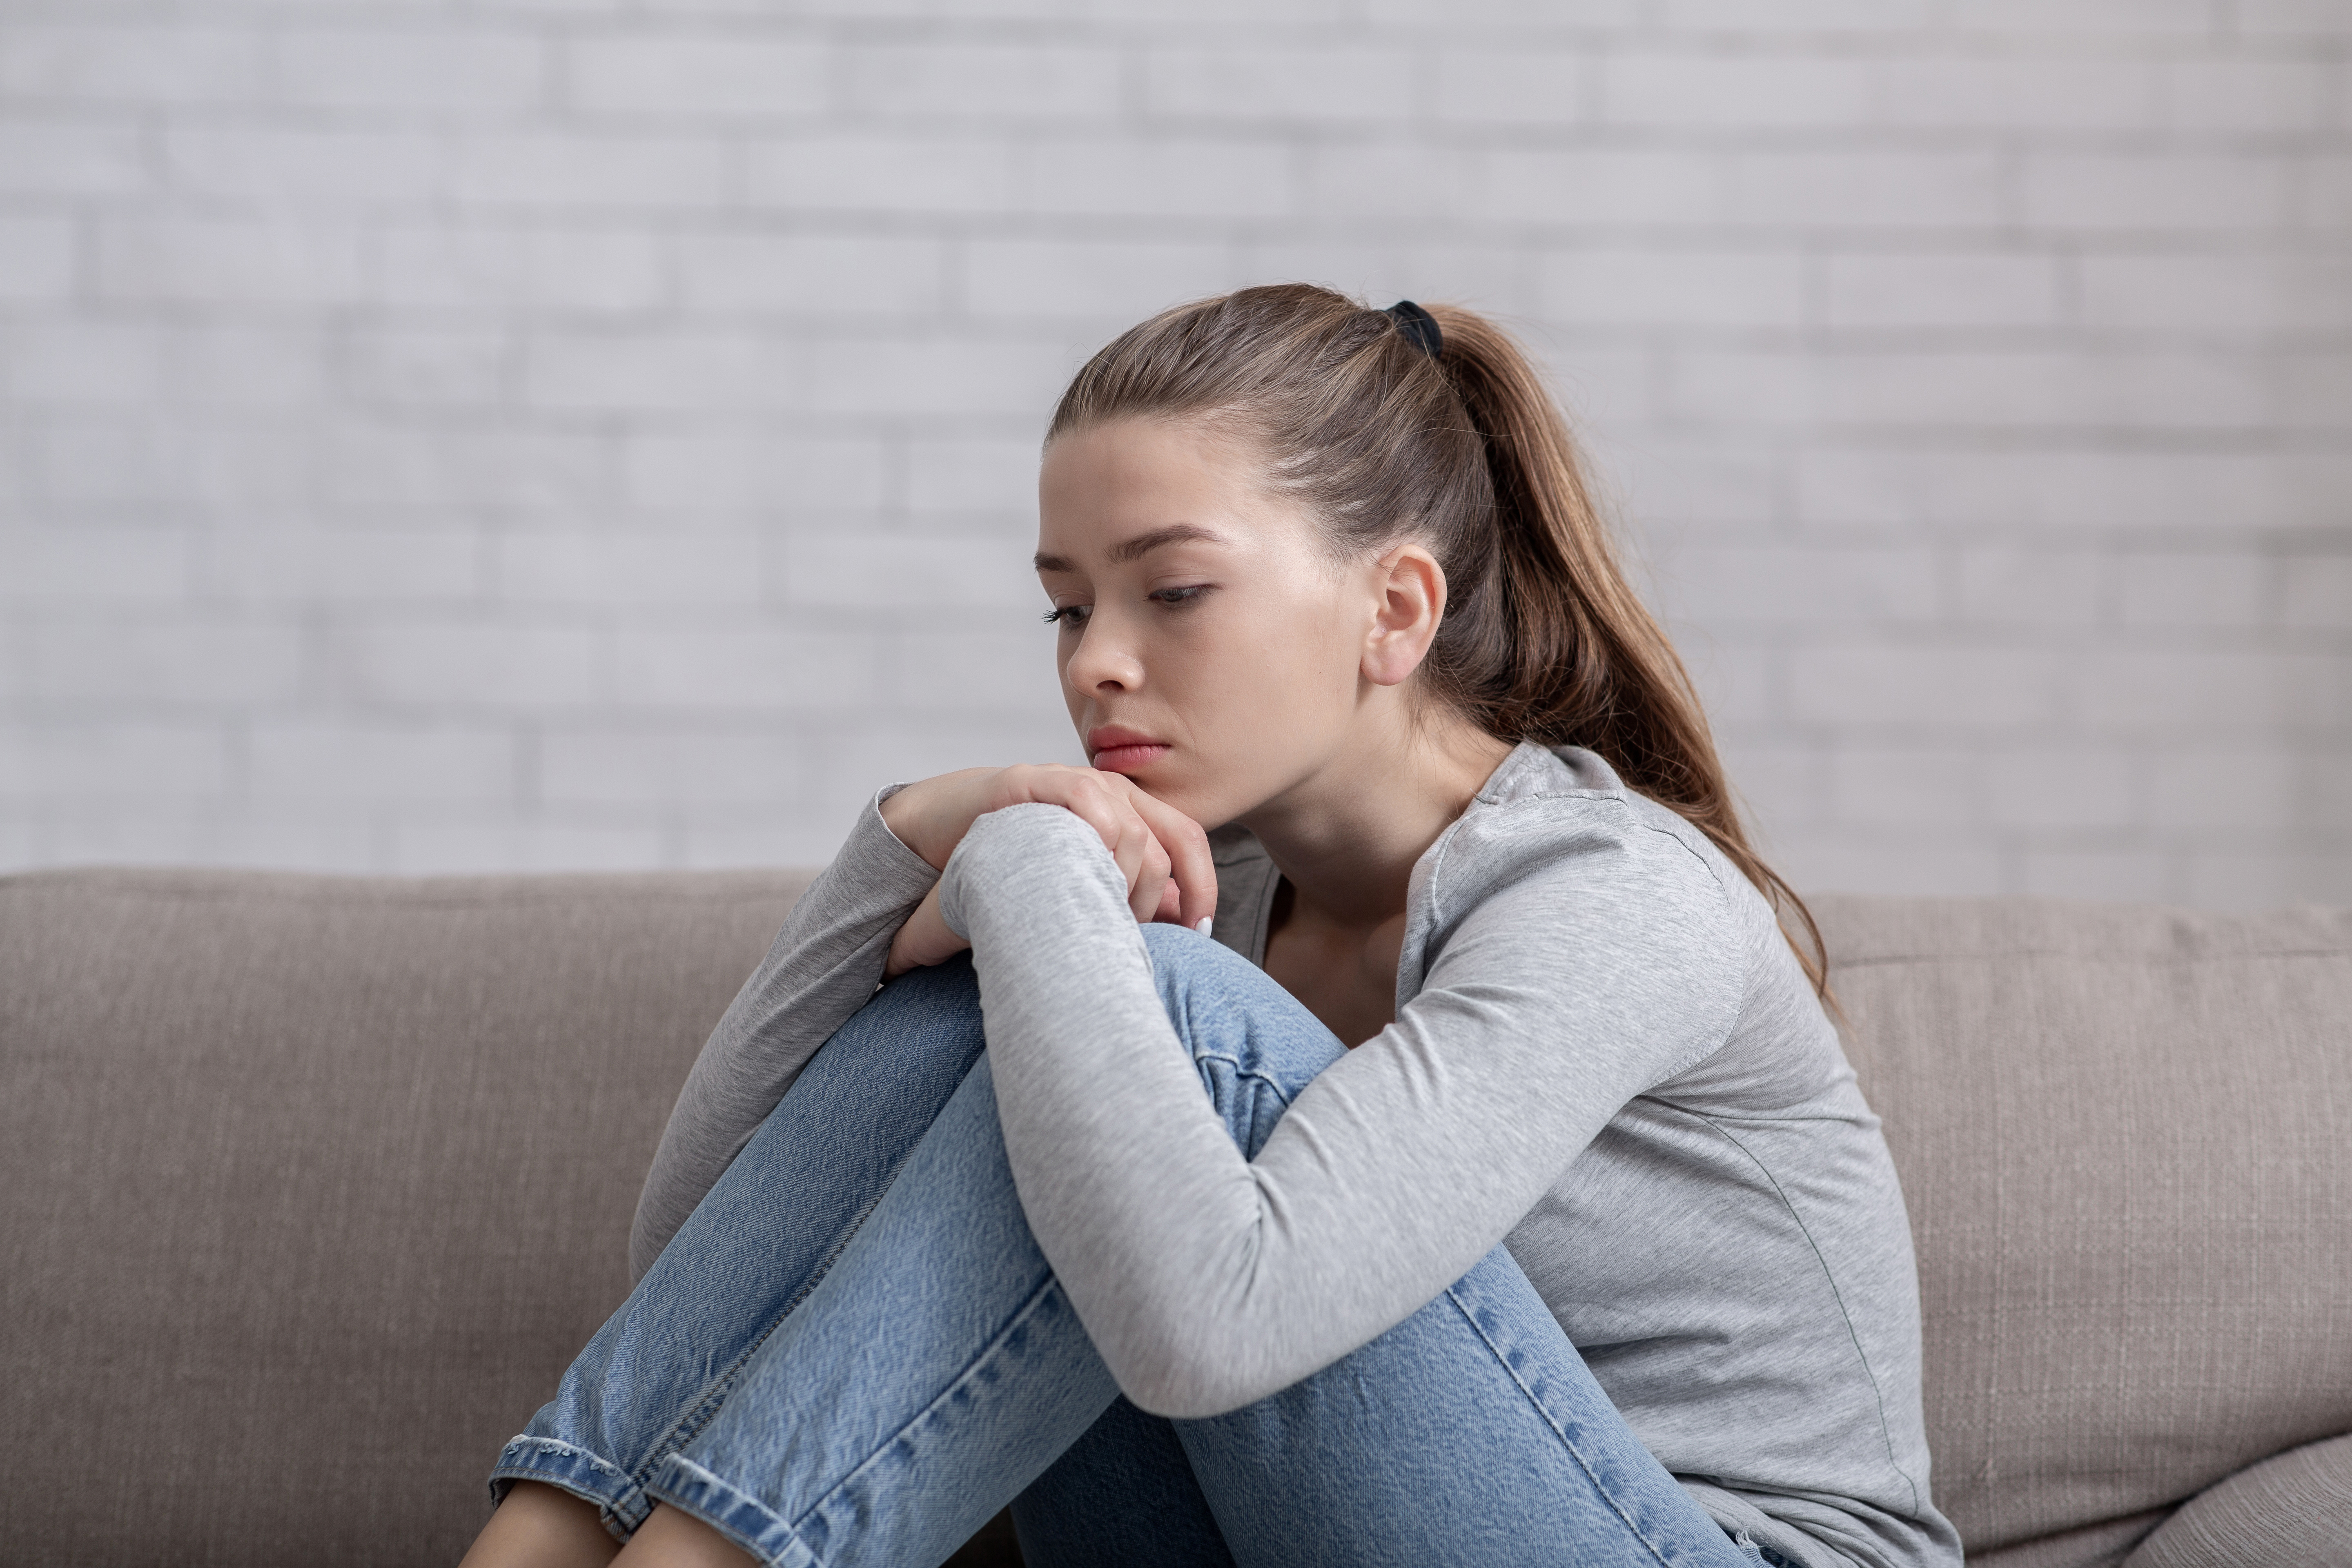 A sad young woman sitting alone on sofa | Source: Shutterstock